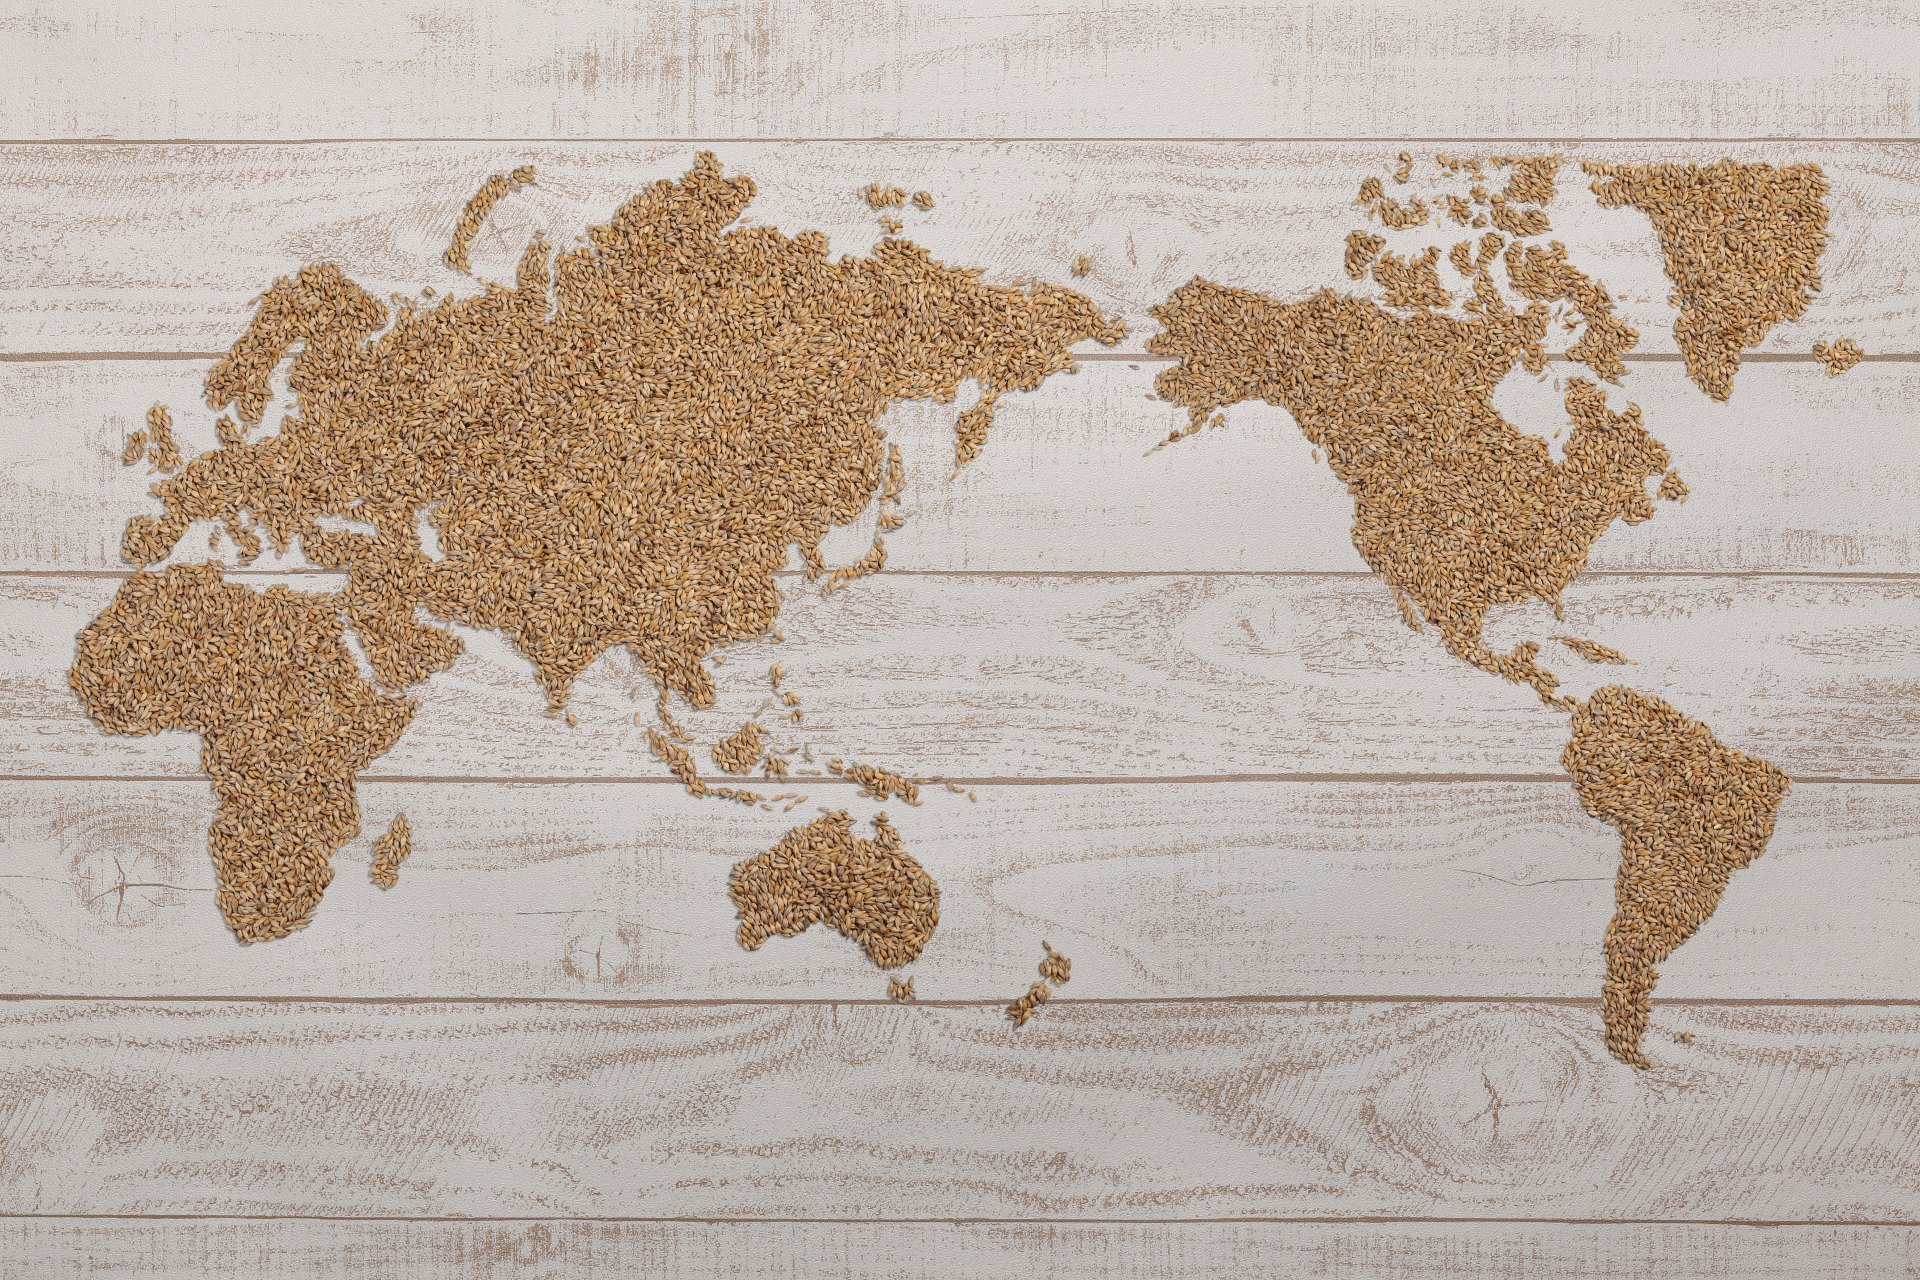 World map in grains